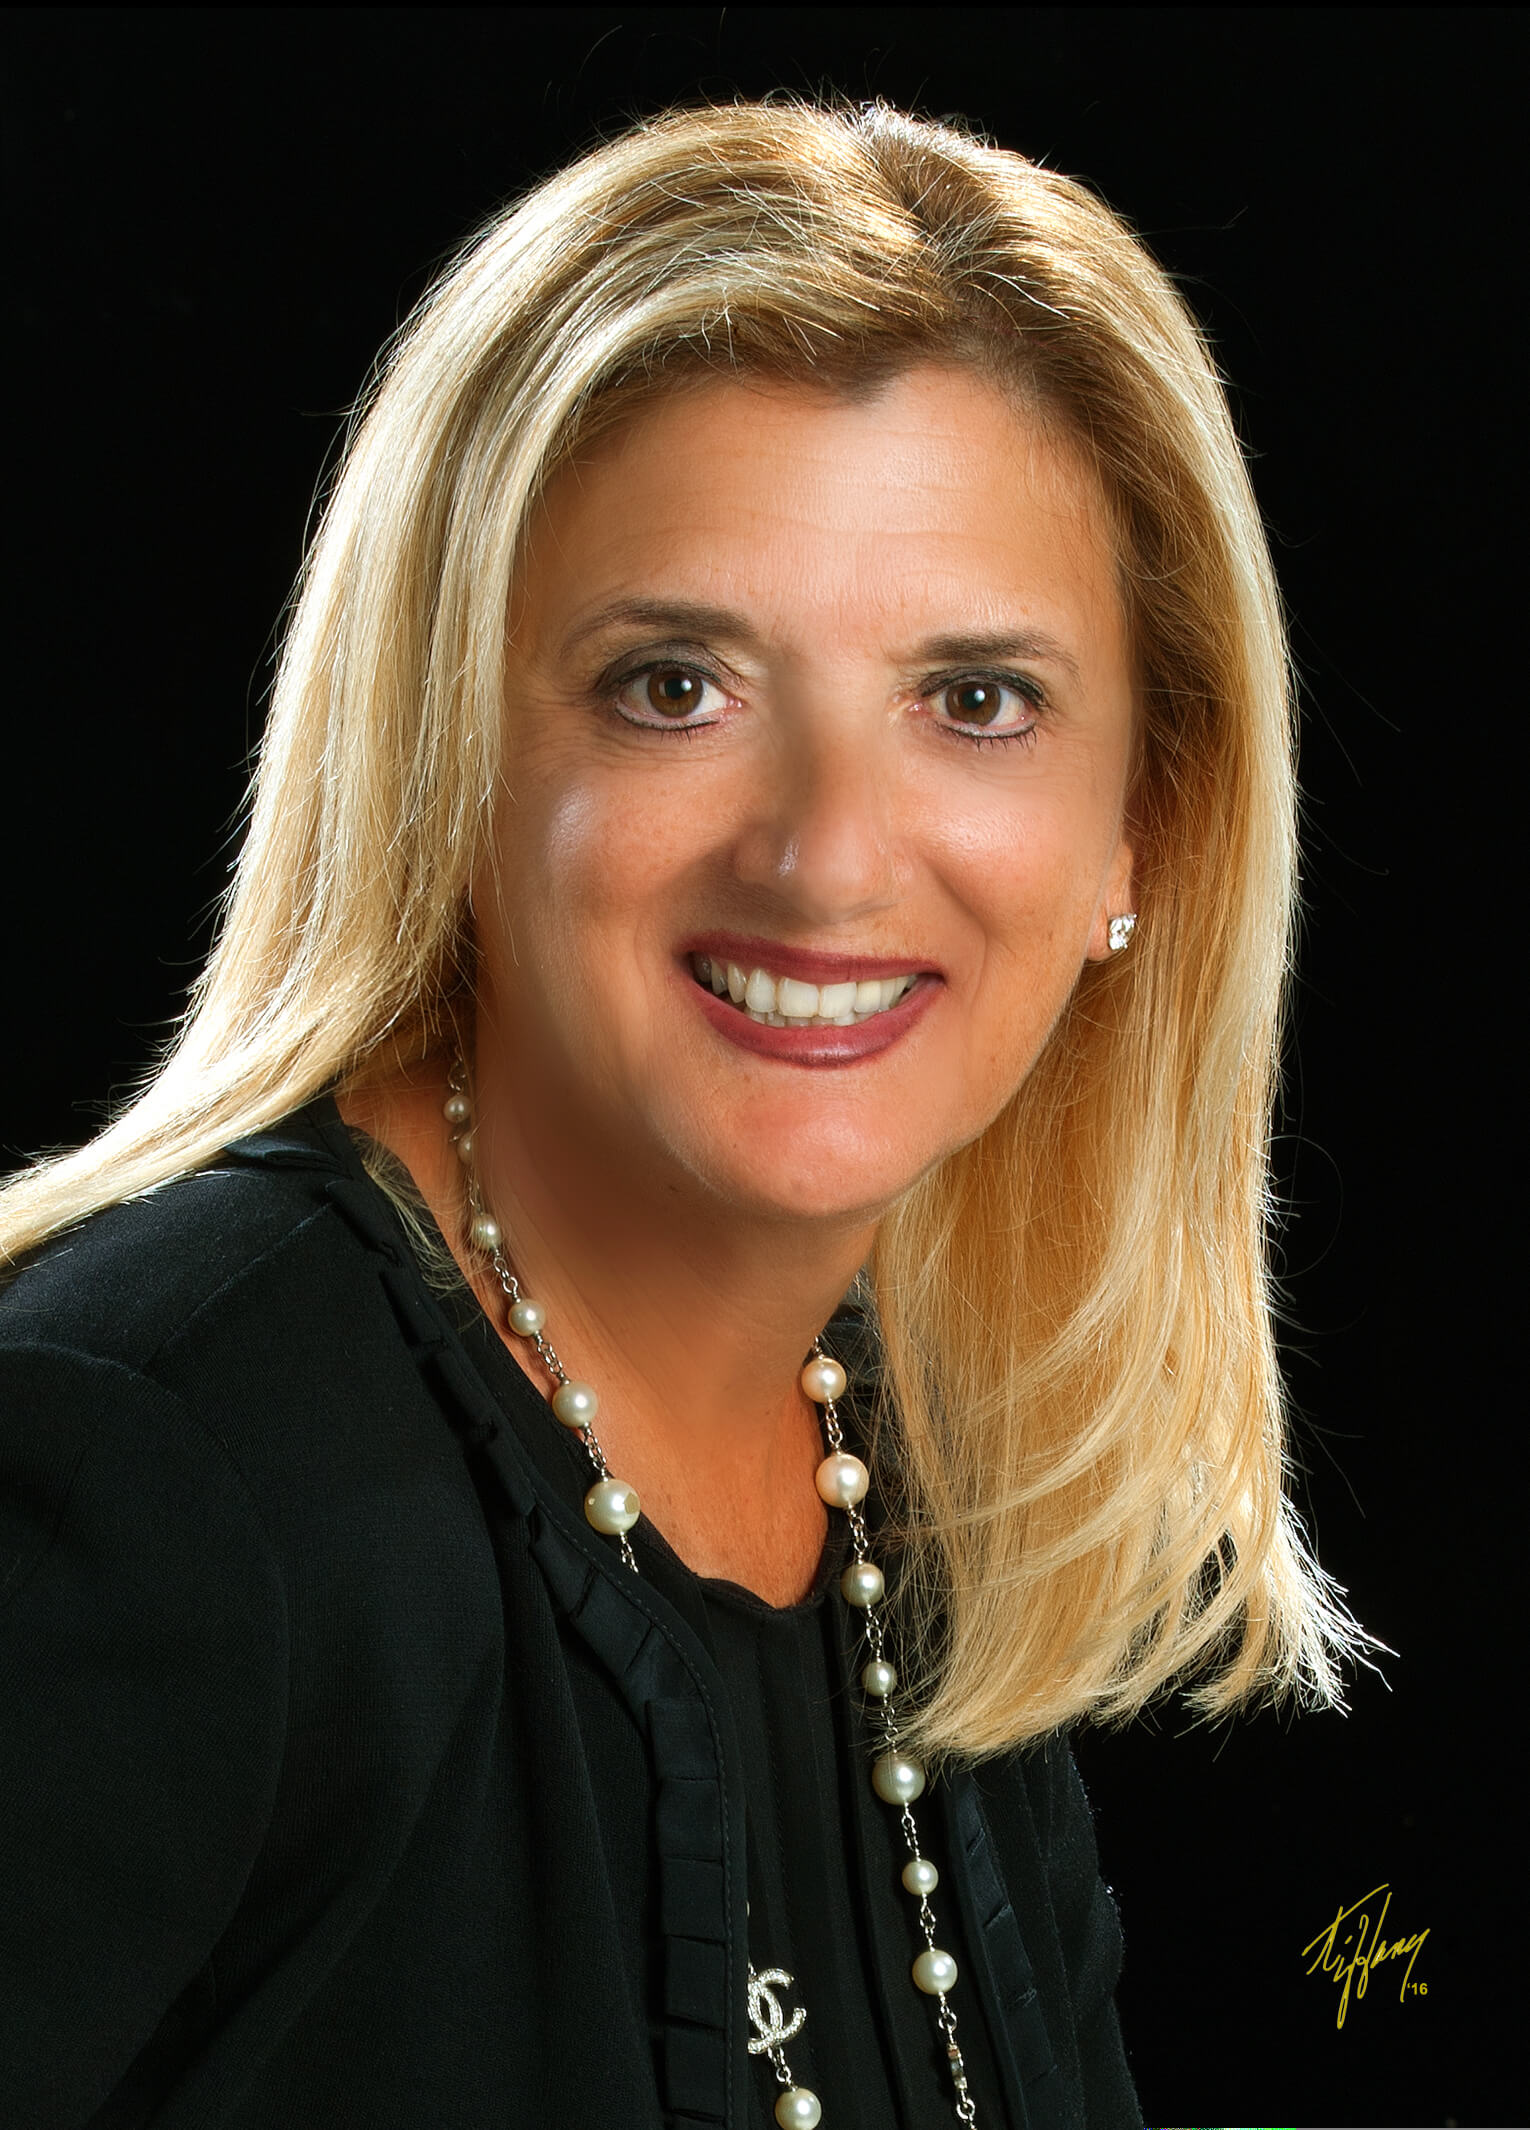 Beverly Capasso is the new CEO of Broward Health